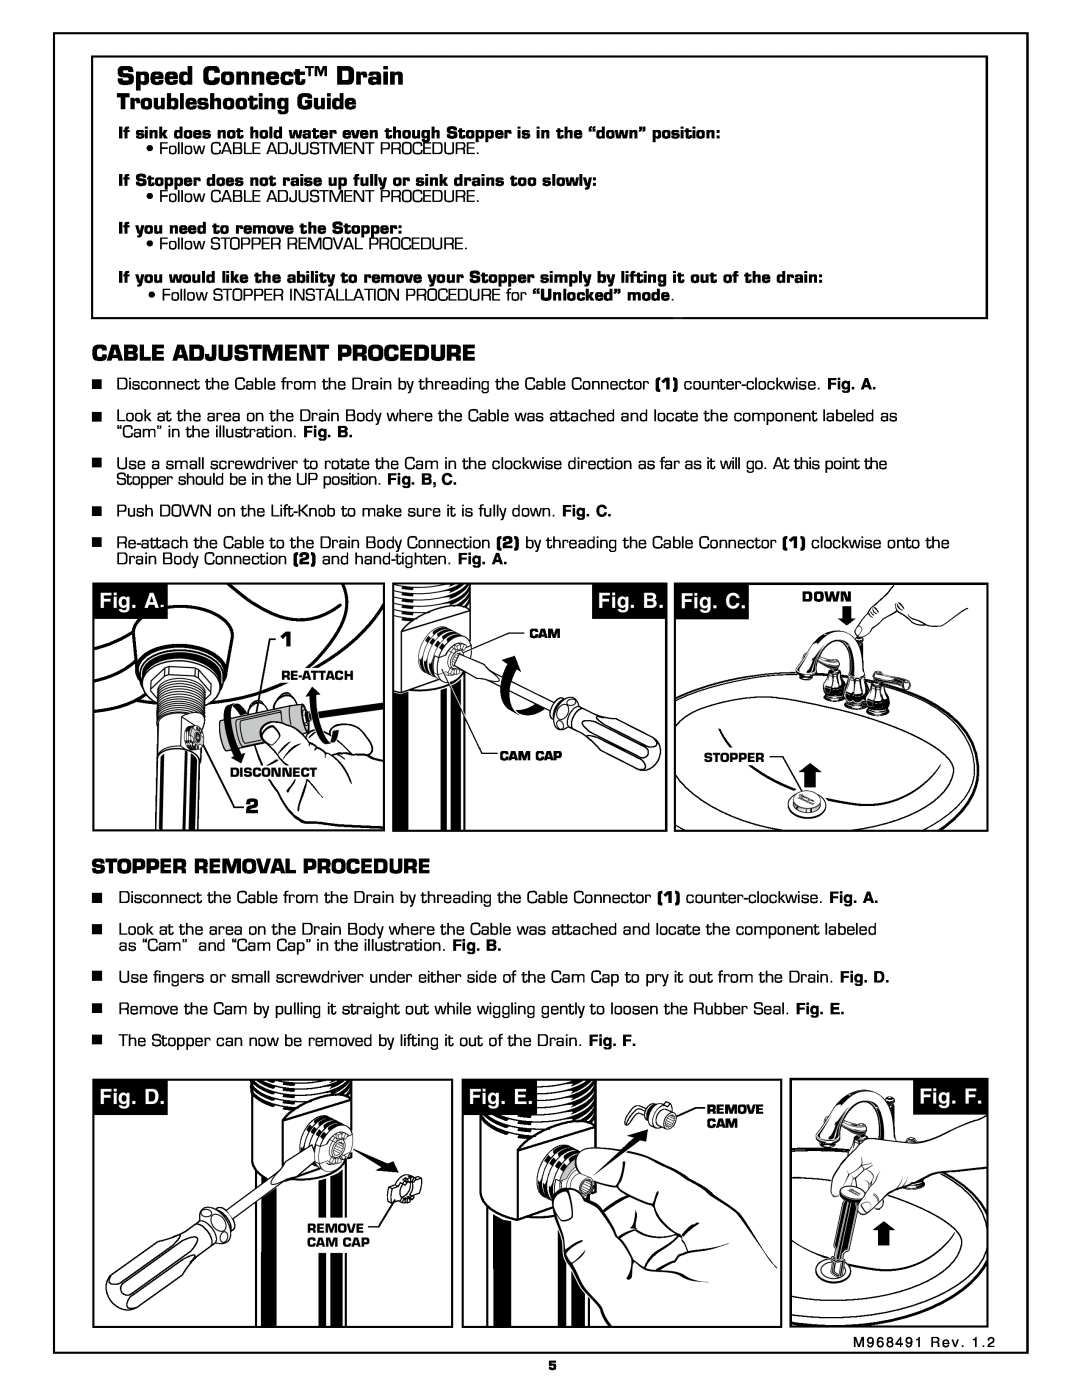 American Standard 6028.240 Troubleshooting Guide, Cable Adjustment Procedure, Fig. A, Fig. B, Fig. C, Fig. D, Fig. E 